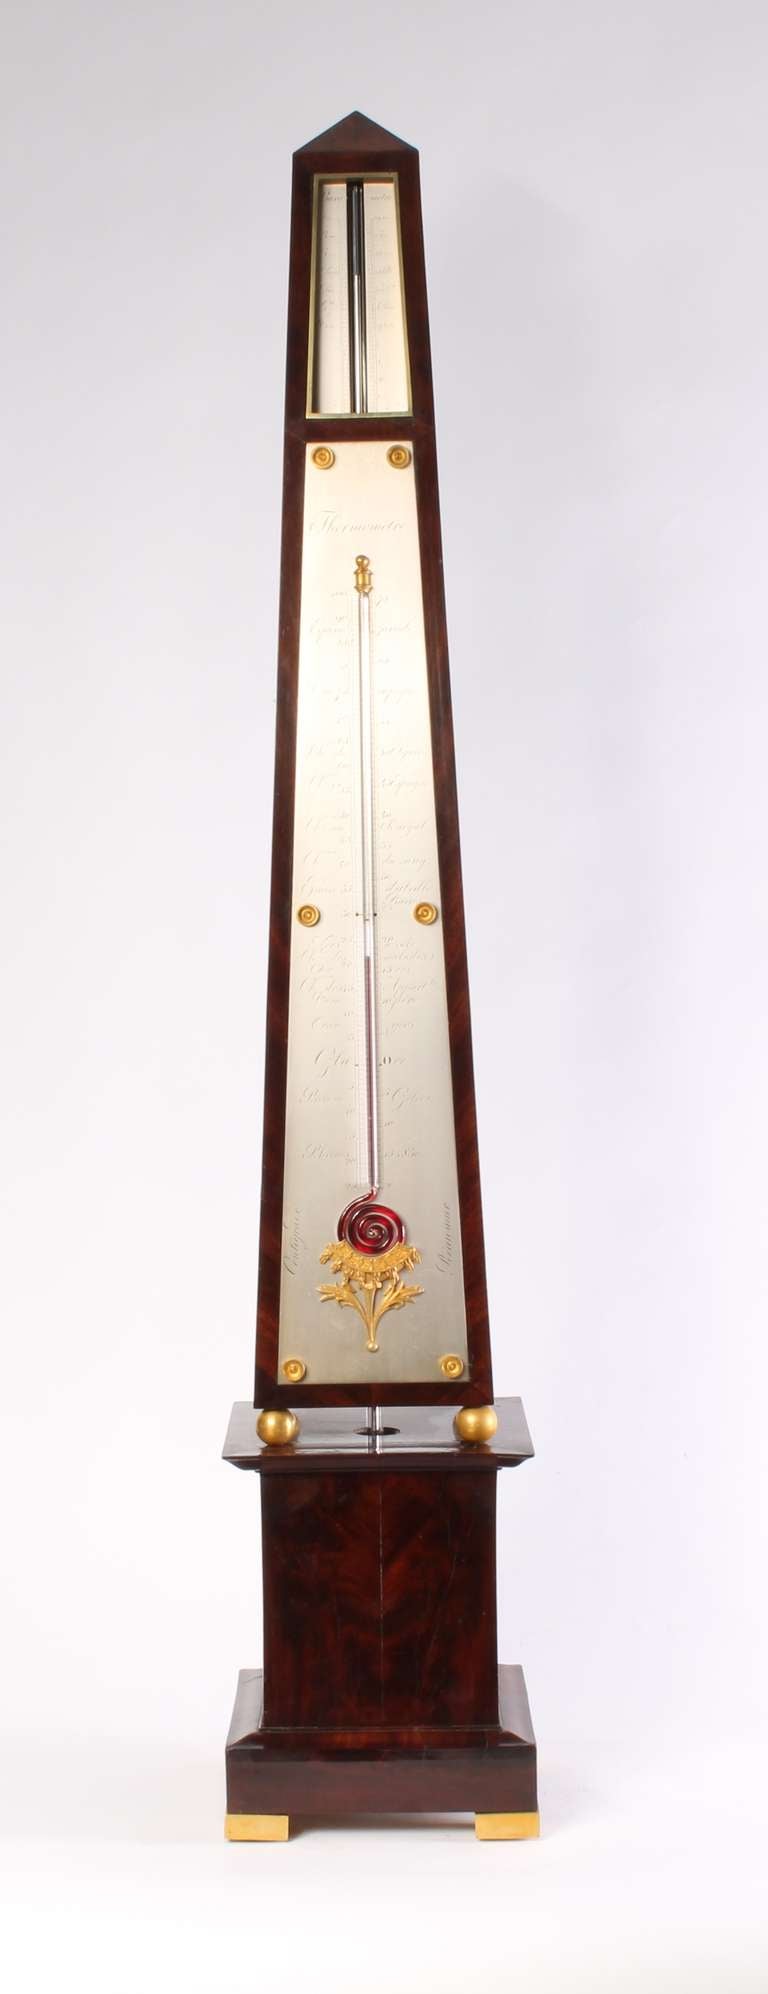 The flame mahogany-veneered pine case consists of two parts. The obelisk-shaped top has firegilt brass ball feet and is placed on a moulded base with firegilt brass block feet. The silvered brass register plates of the barometer are let in flush